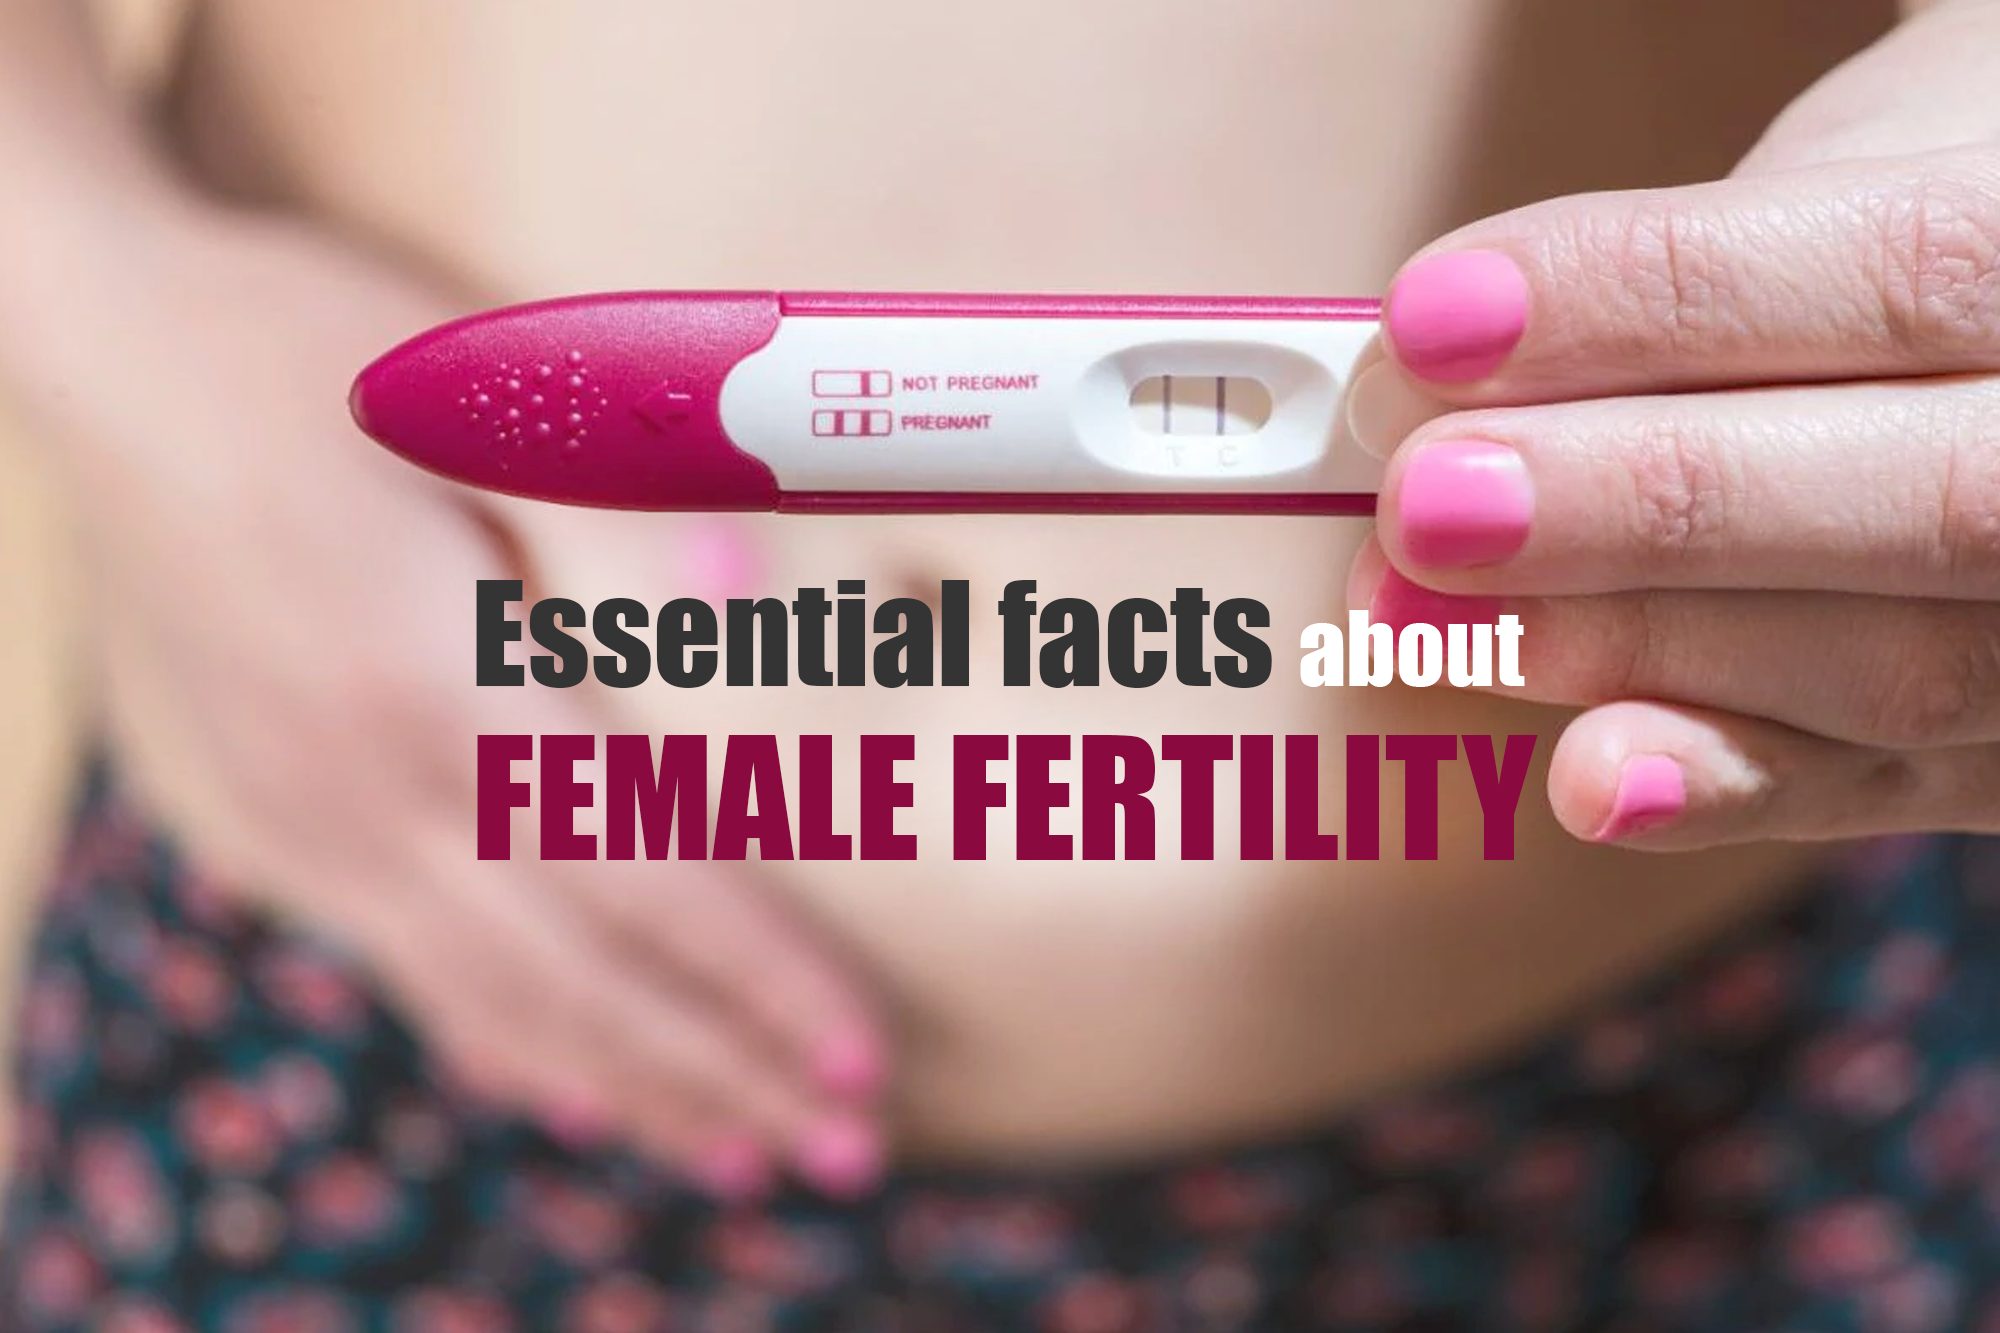 Essential facts about female fertility